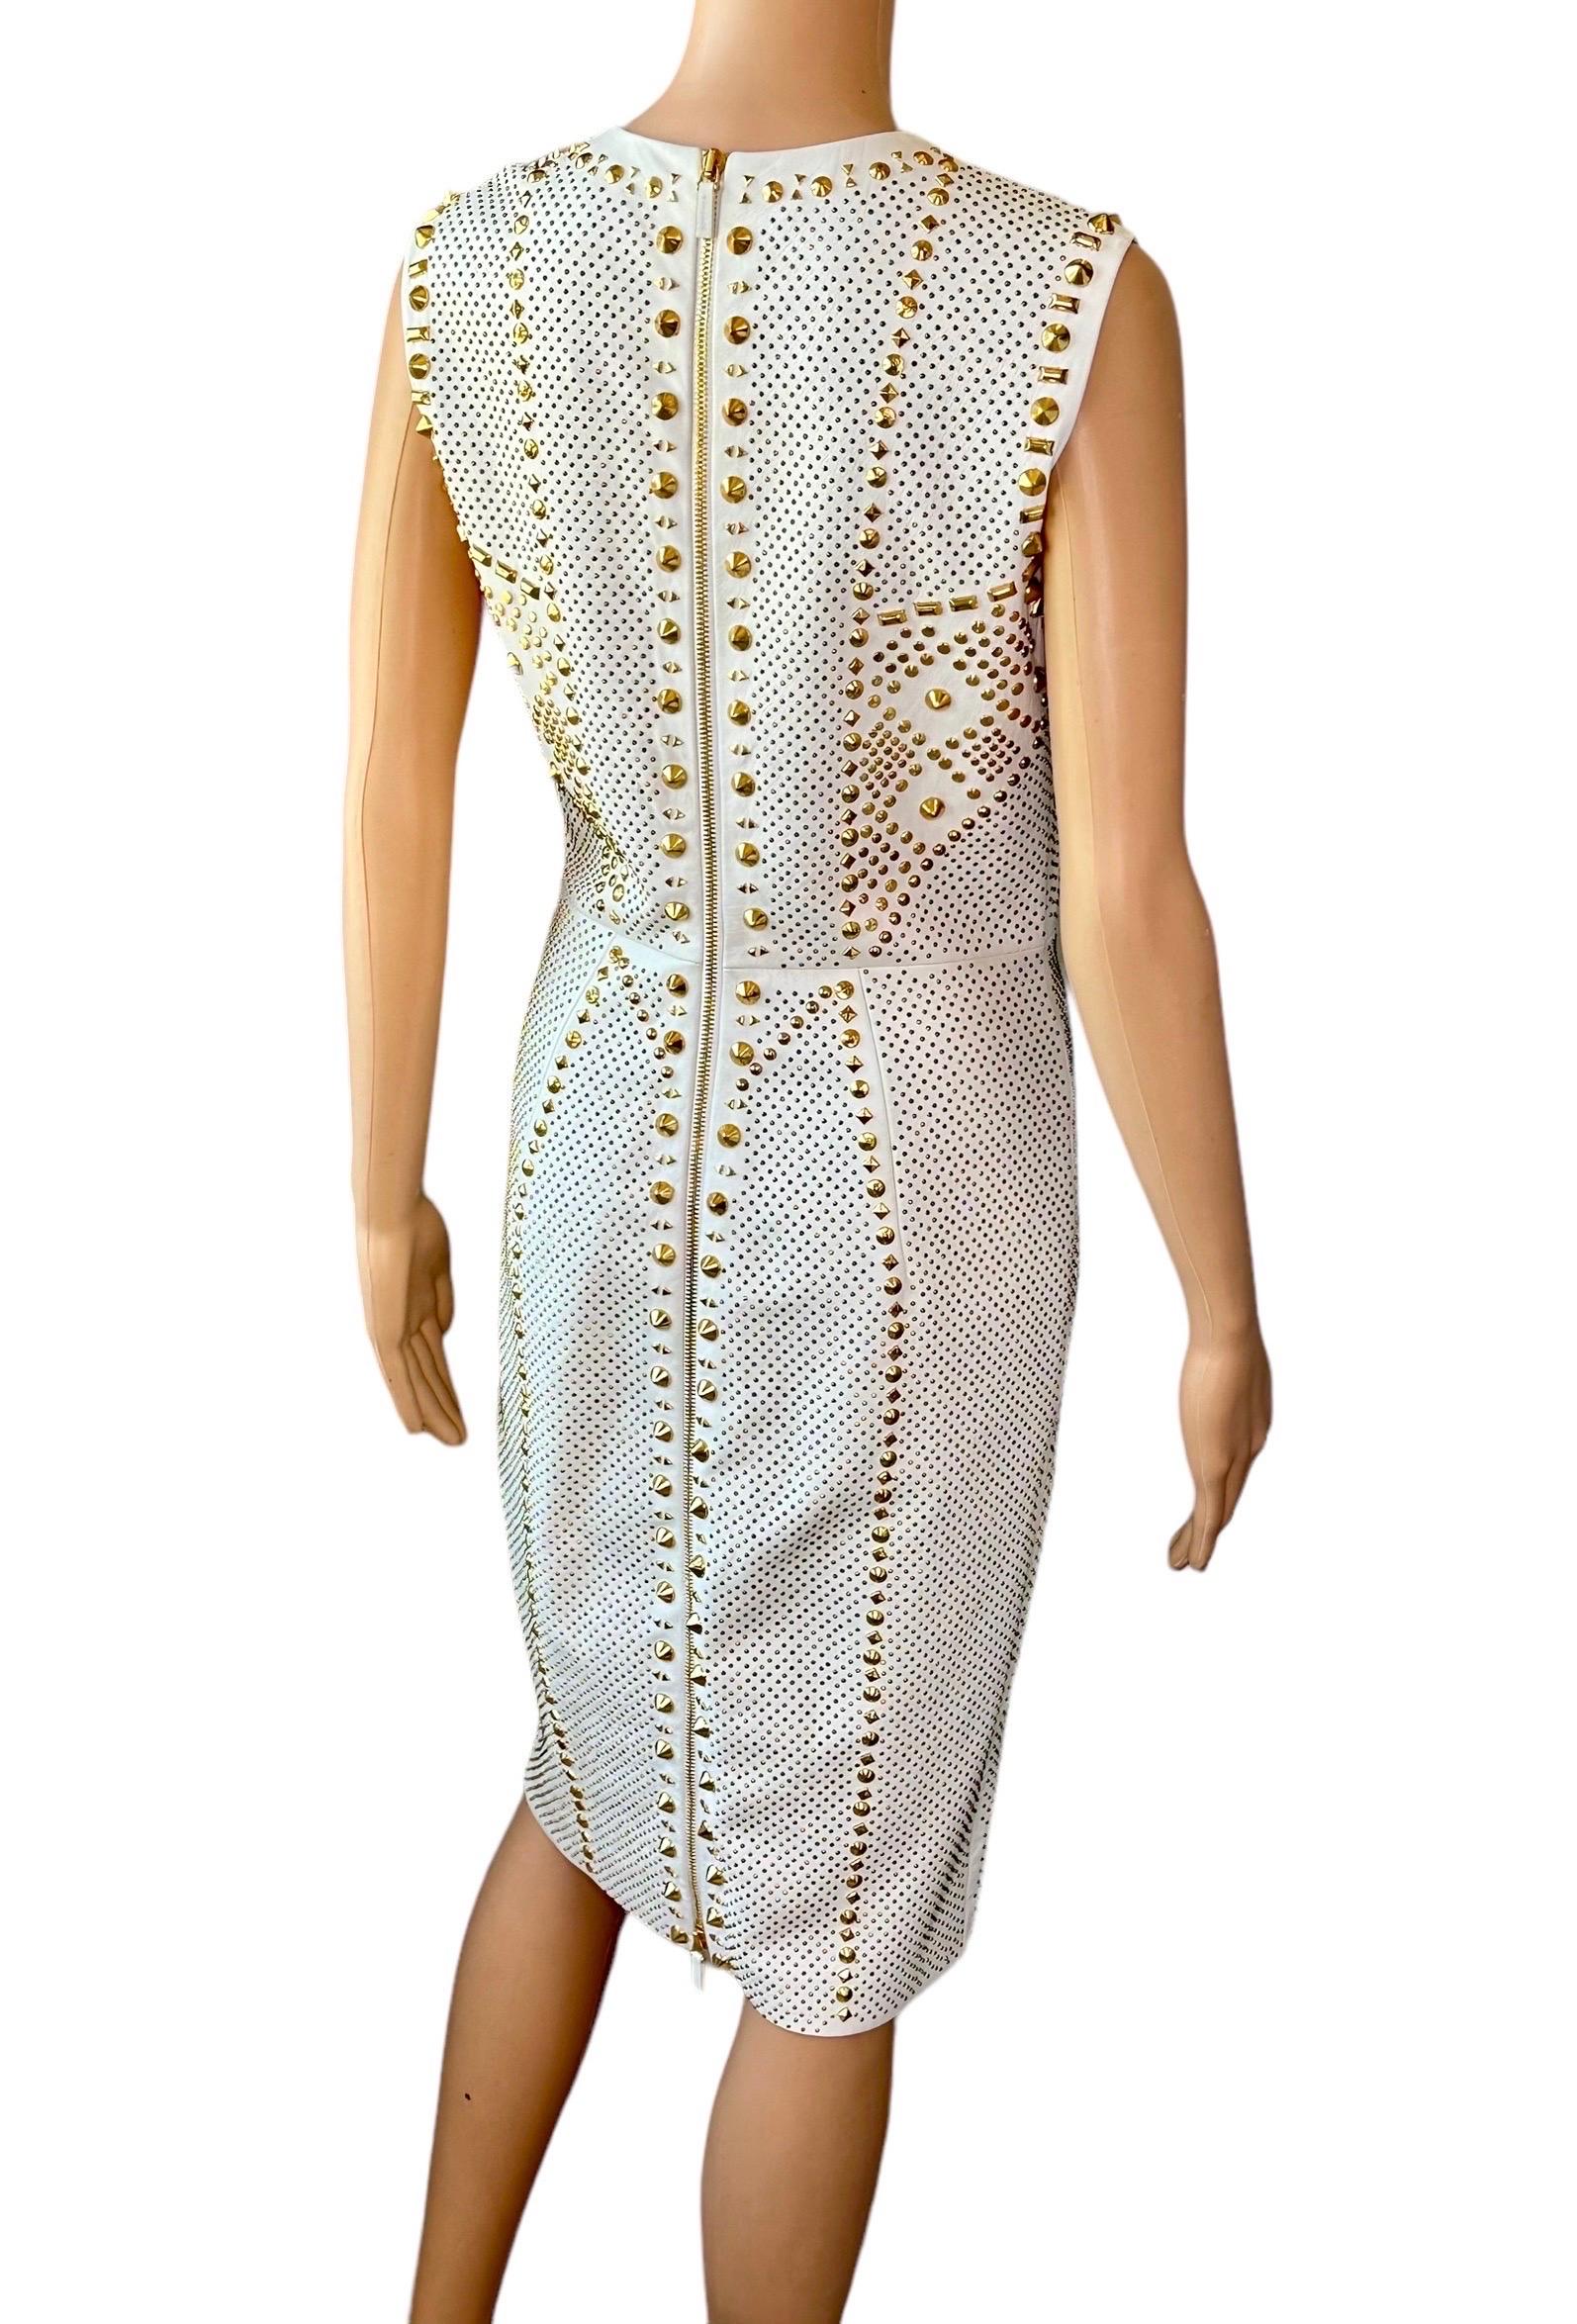 Versace S/S 2012 Runway Embellished Gold Studded Ivory Leather Dress  For Sale 5